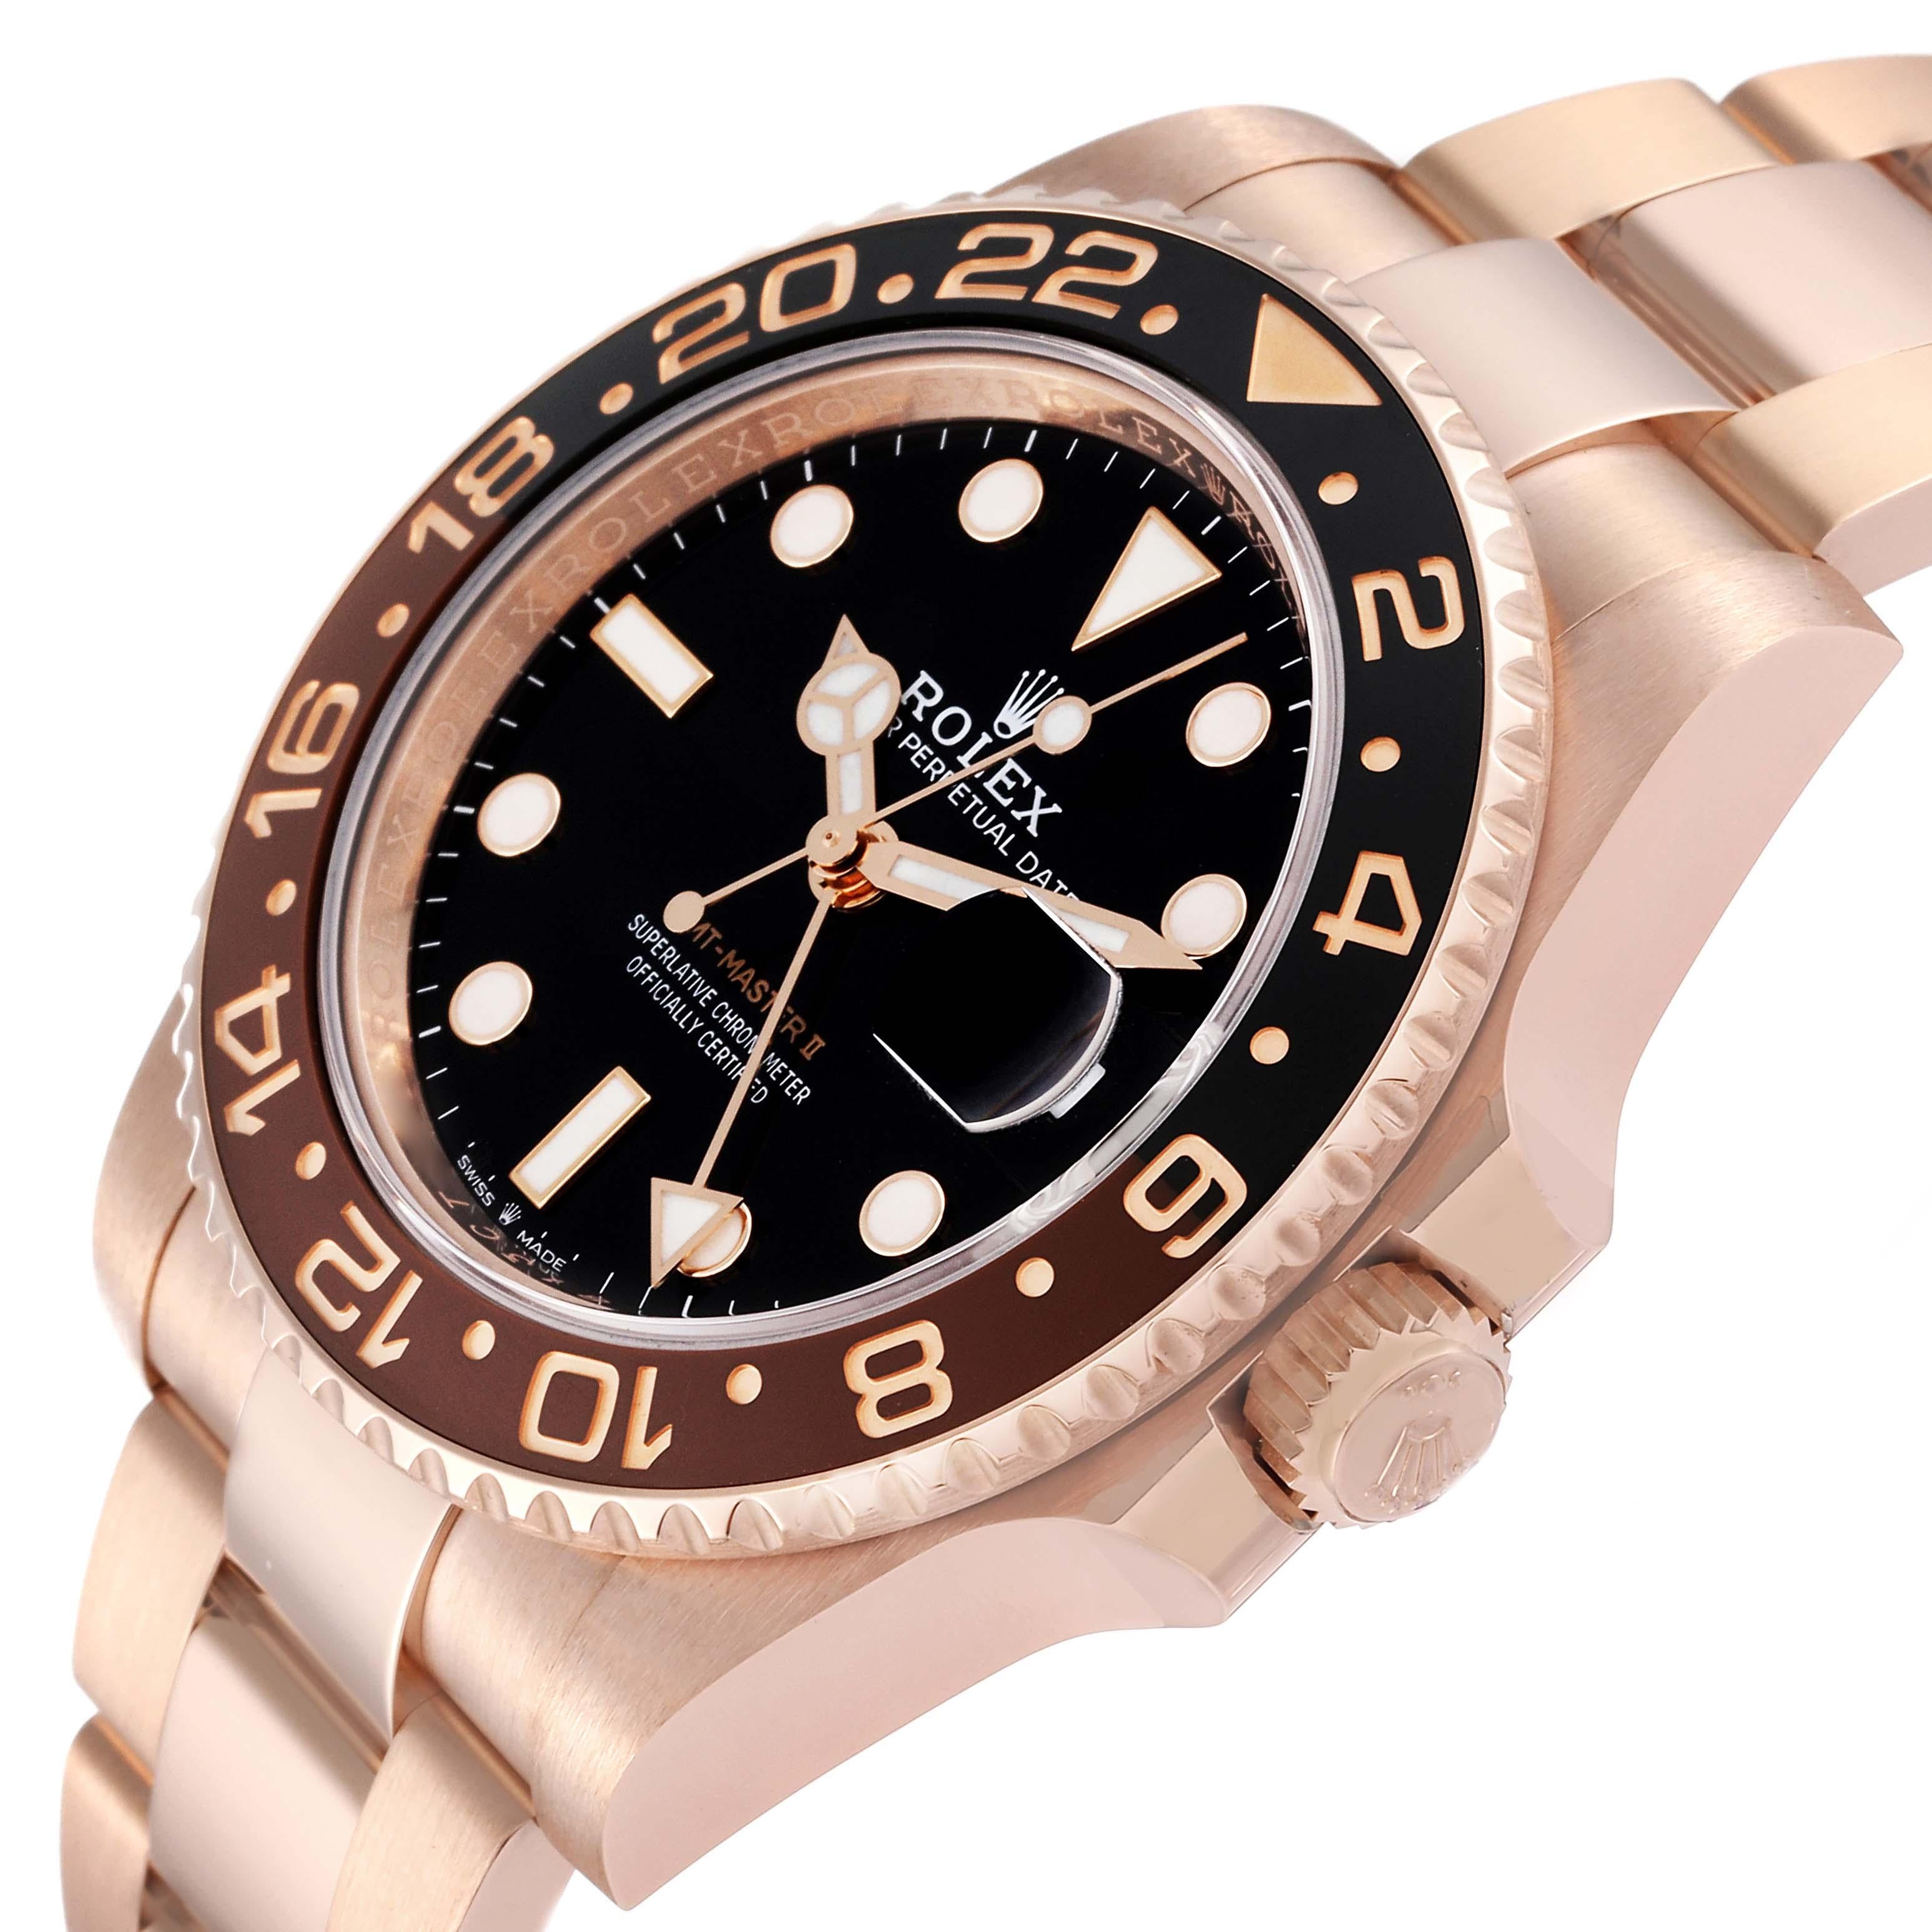 Rolex GMT Master II Black Brown Root Beer Rose Gold Mens Watch 126715 Box Card 4